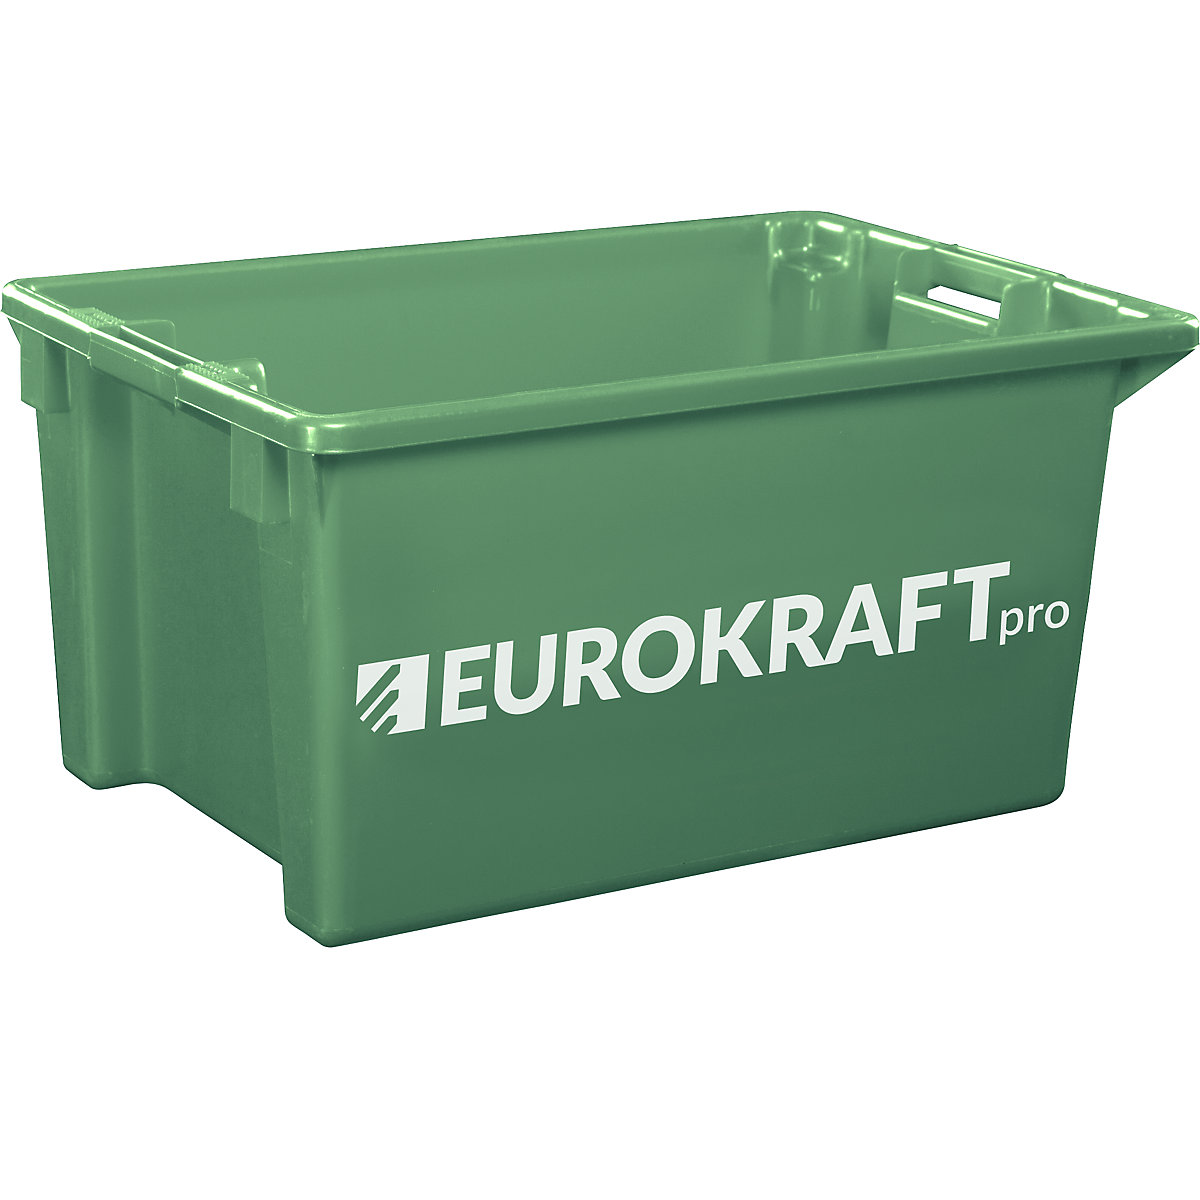 EUROKRAFTpro – Stack/nest container made of polypropylene suitable for foodstuffs, 70 l capacity, pack of 2, solid walls and base, green